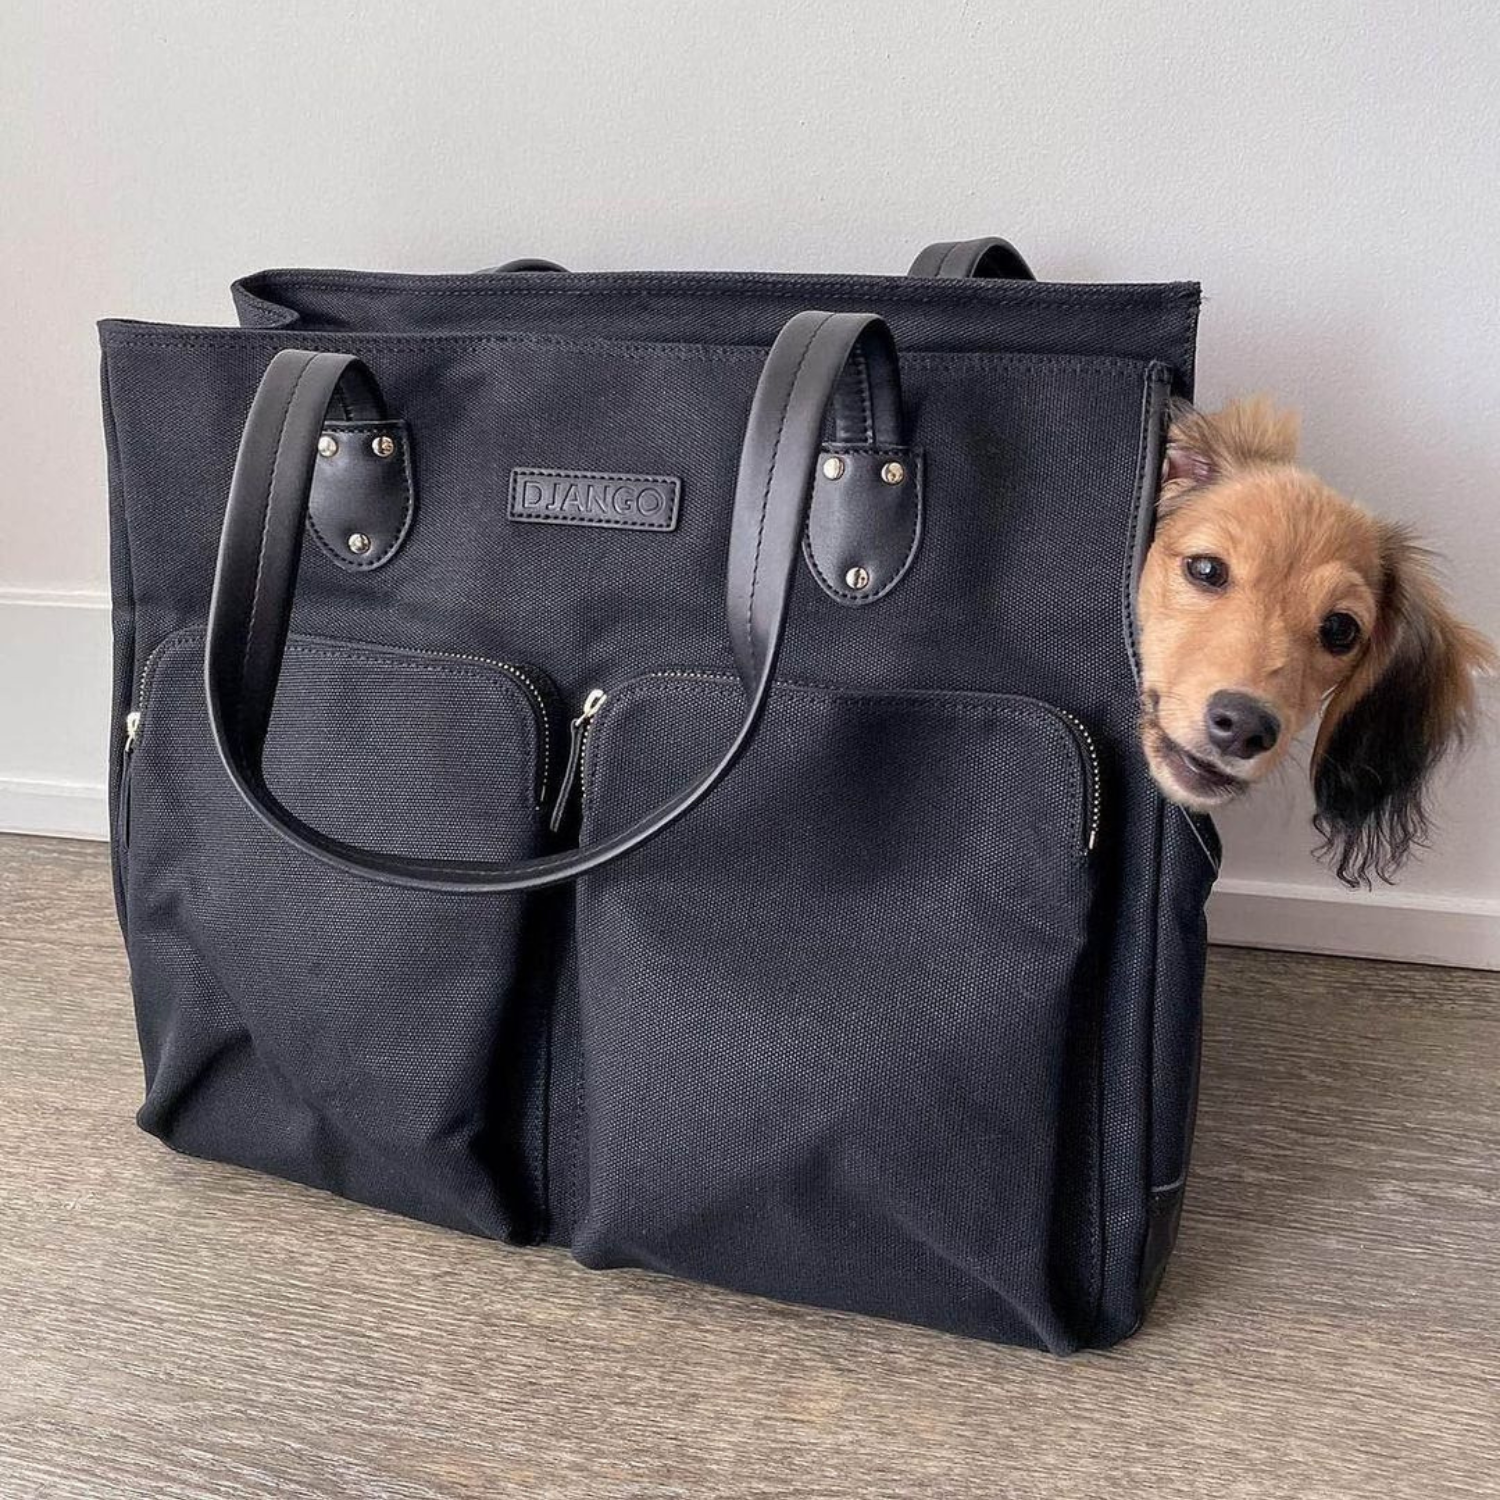 The startup dog in your handbag